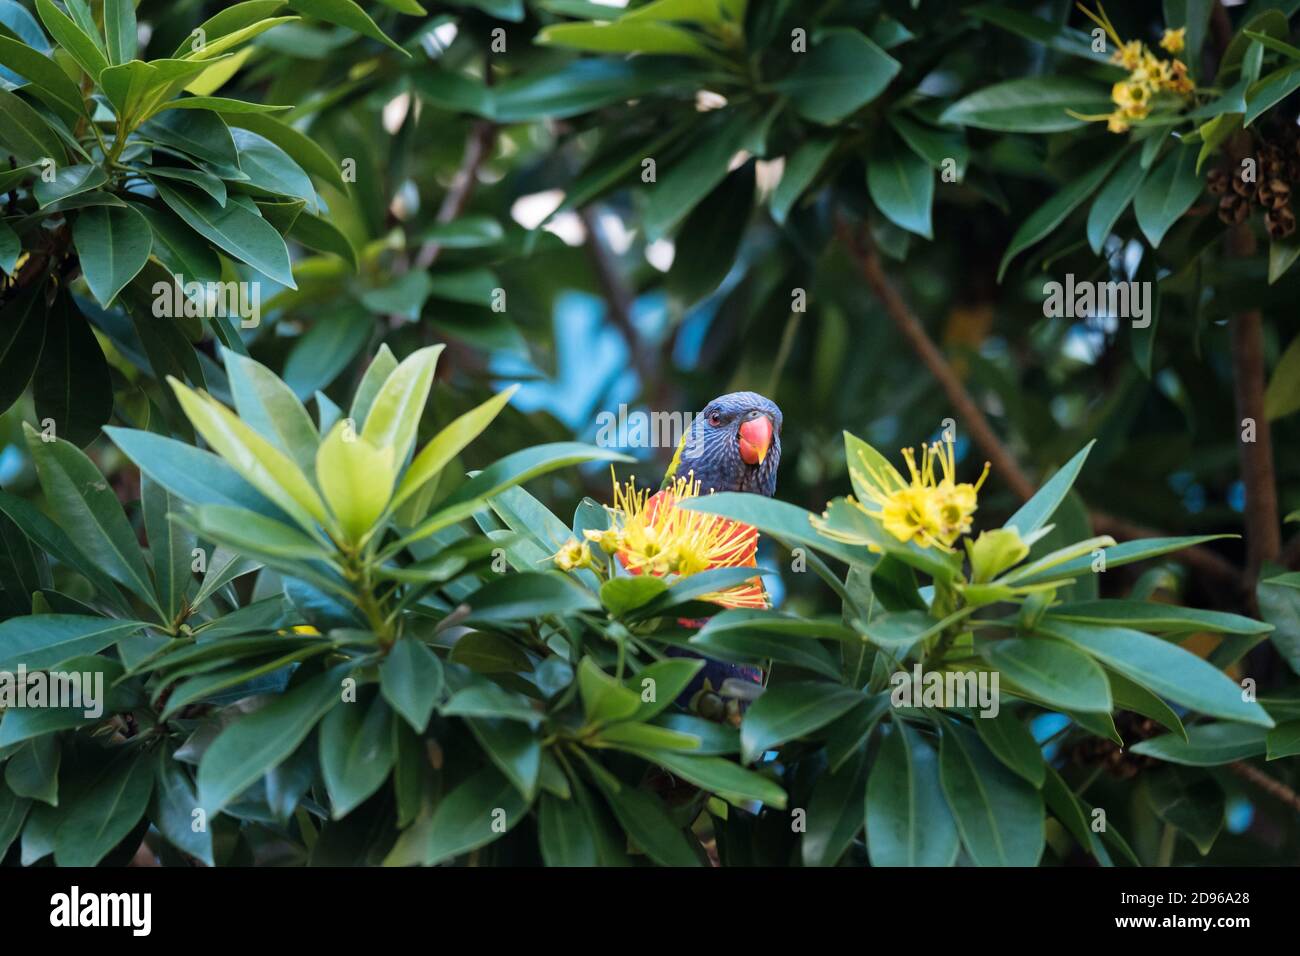 Australian Rainbow Lorikeet (Trichoglossus moluccanus) in its natural habitat perched up in a blooming Golden Penda tree enjoying the view from above Stock Photo